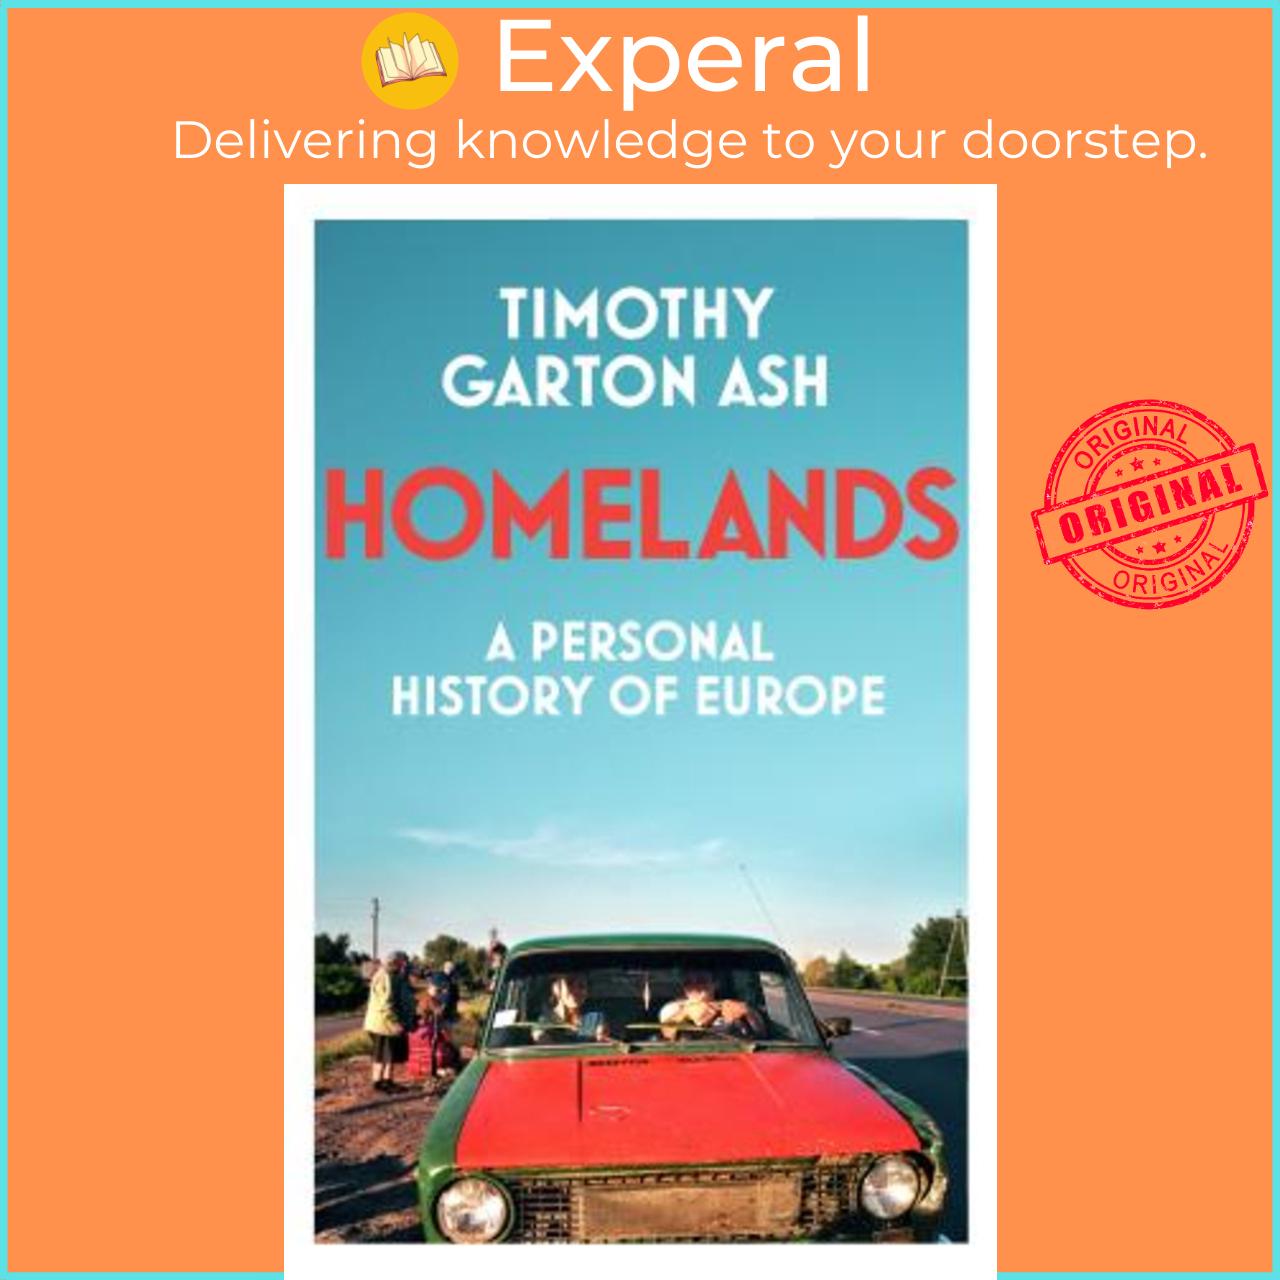 Sách - Homelands : A Personal History of Europe by Timothy Garton Ash (UK edition, hardcover)